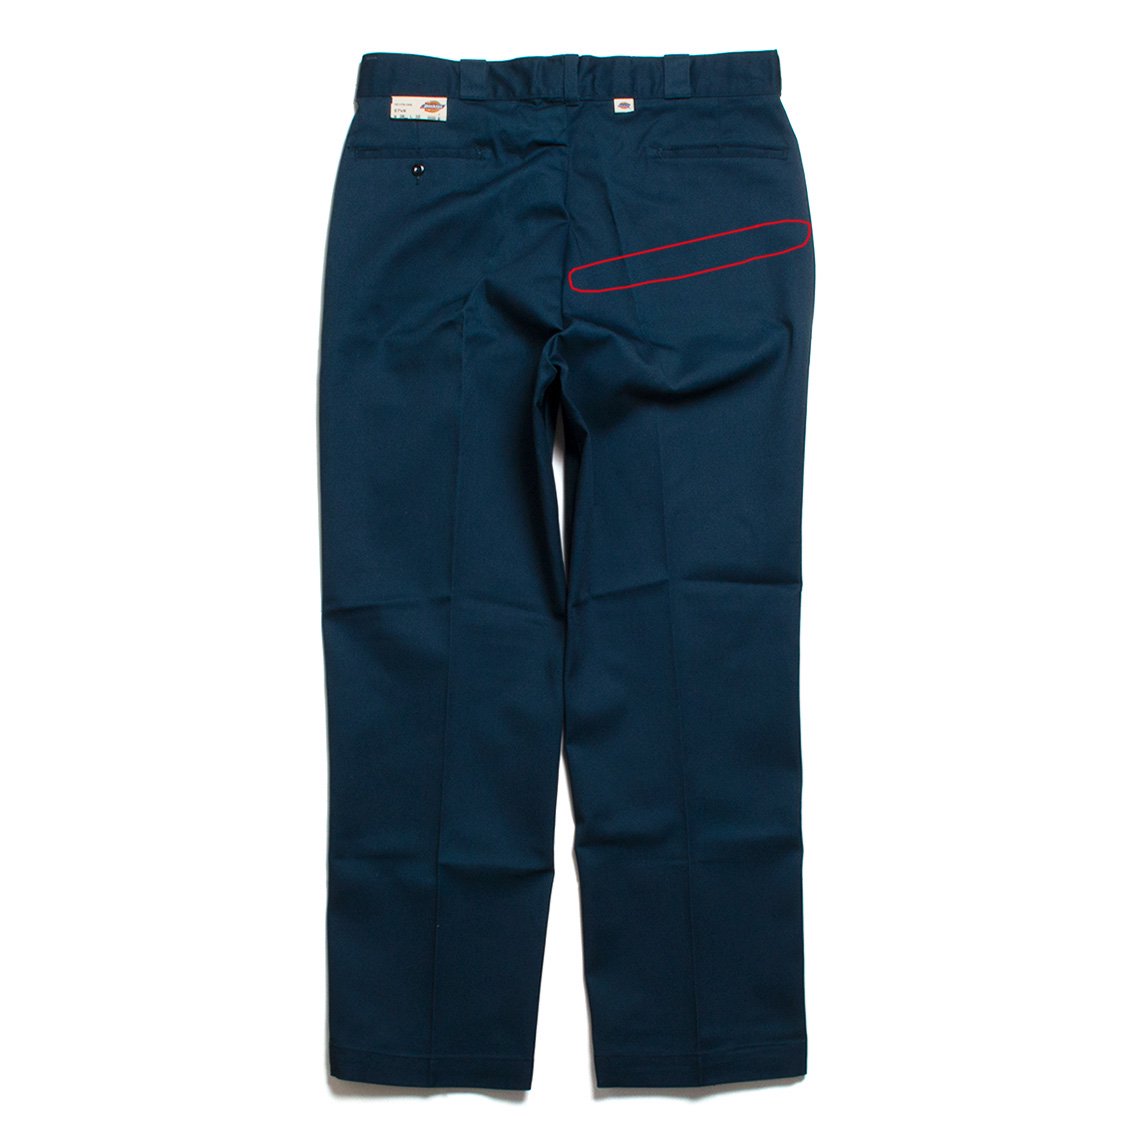 Dickies / ディッキーズ]874 Work Pants 80s ワークパンツ アメリカ製 